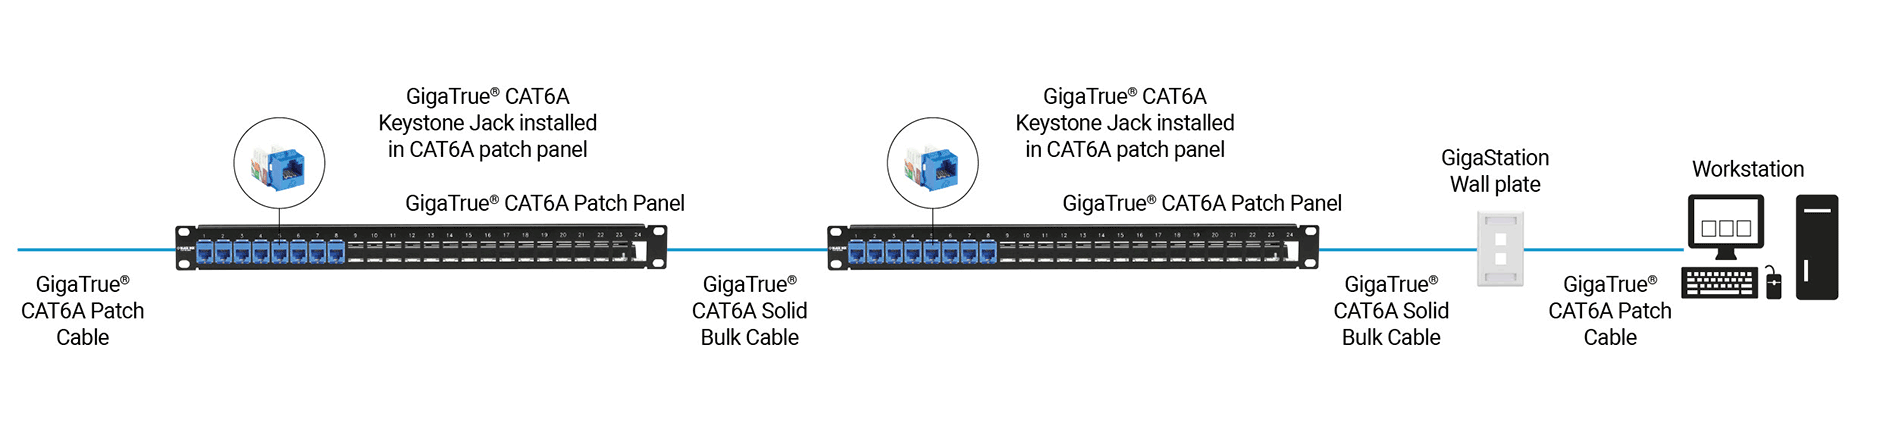 CAT6A Structured Cabling